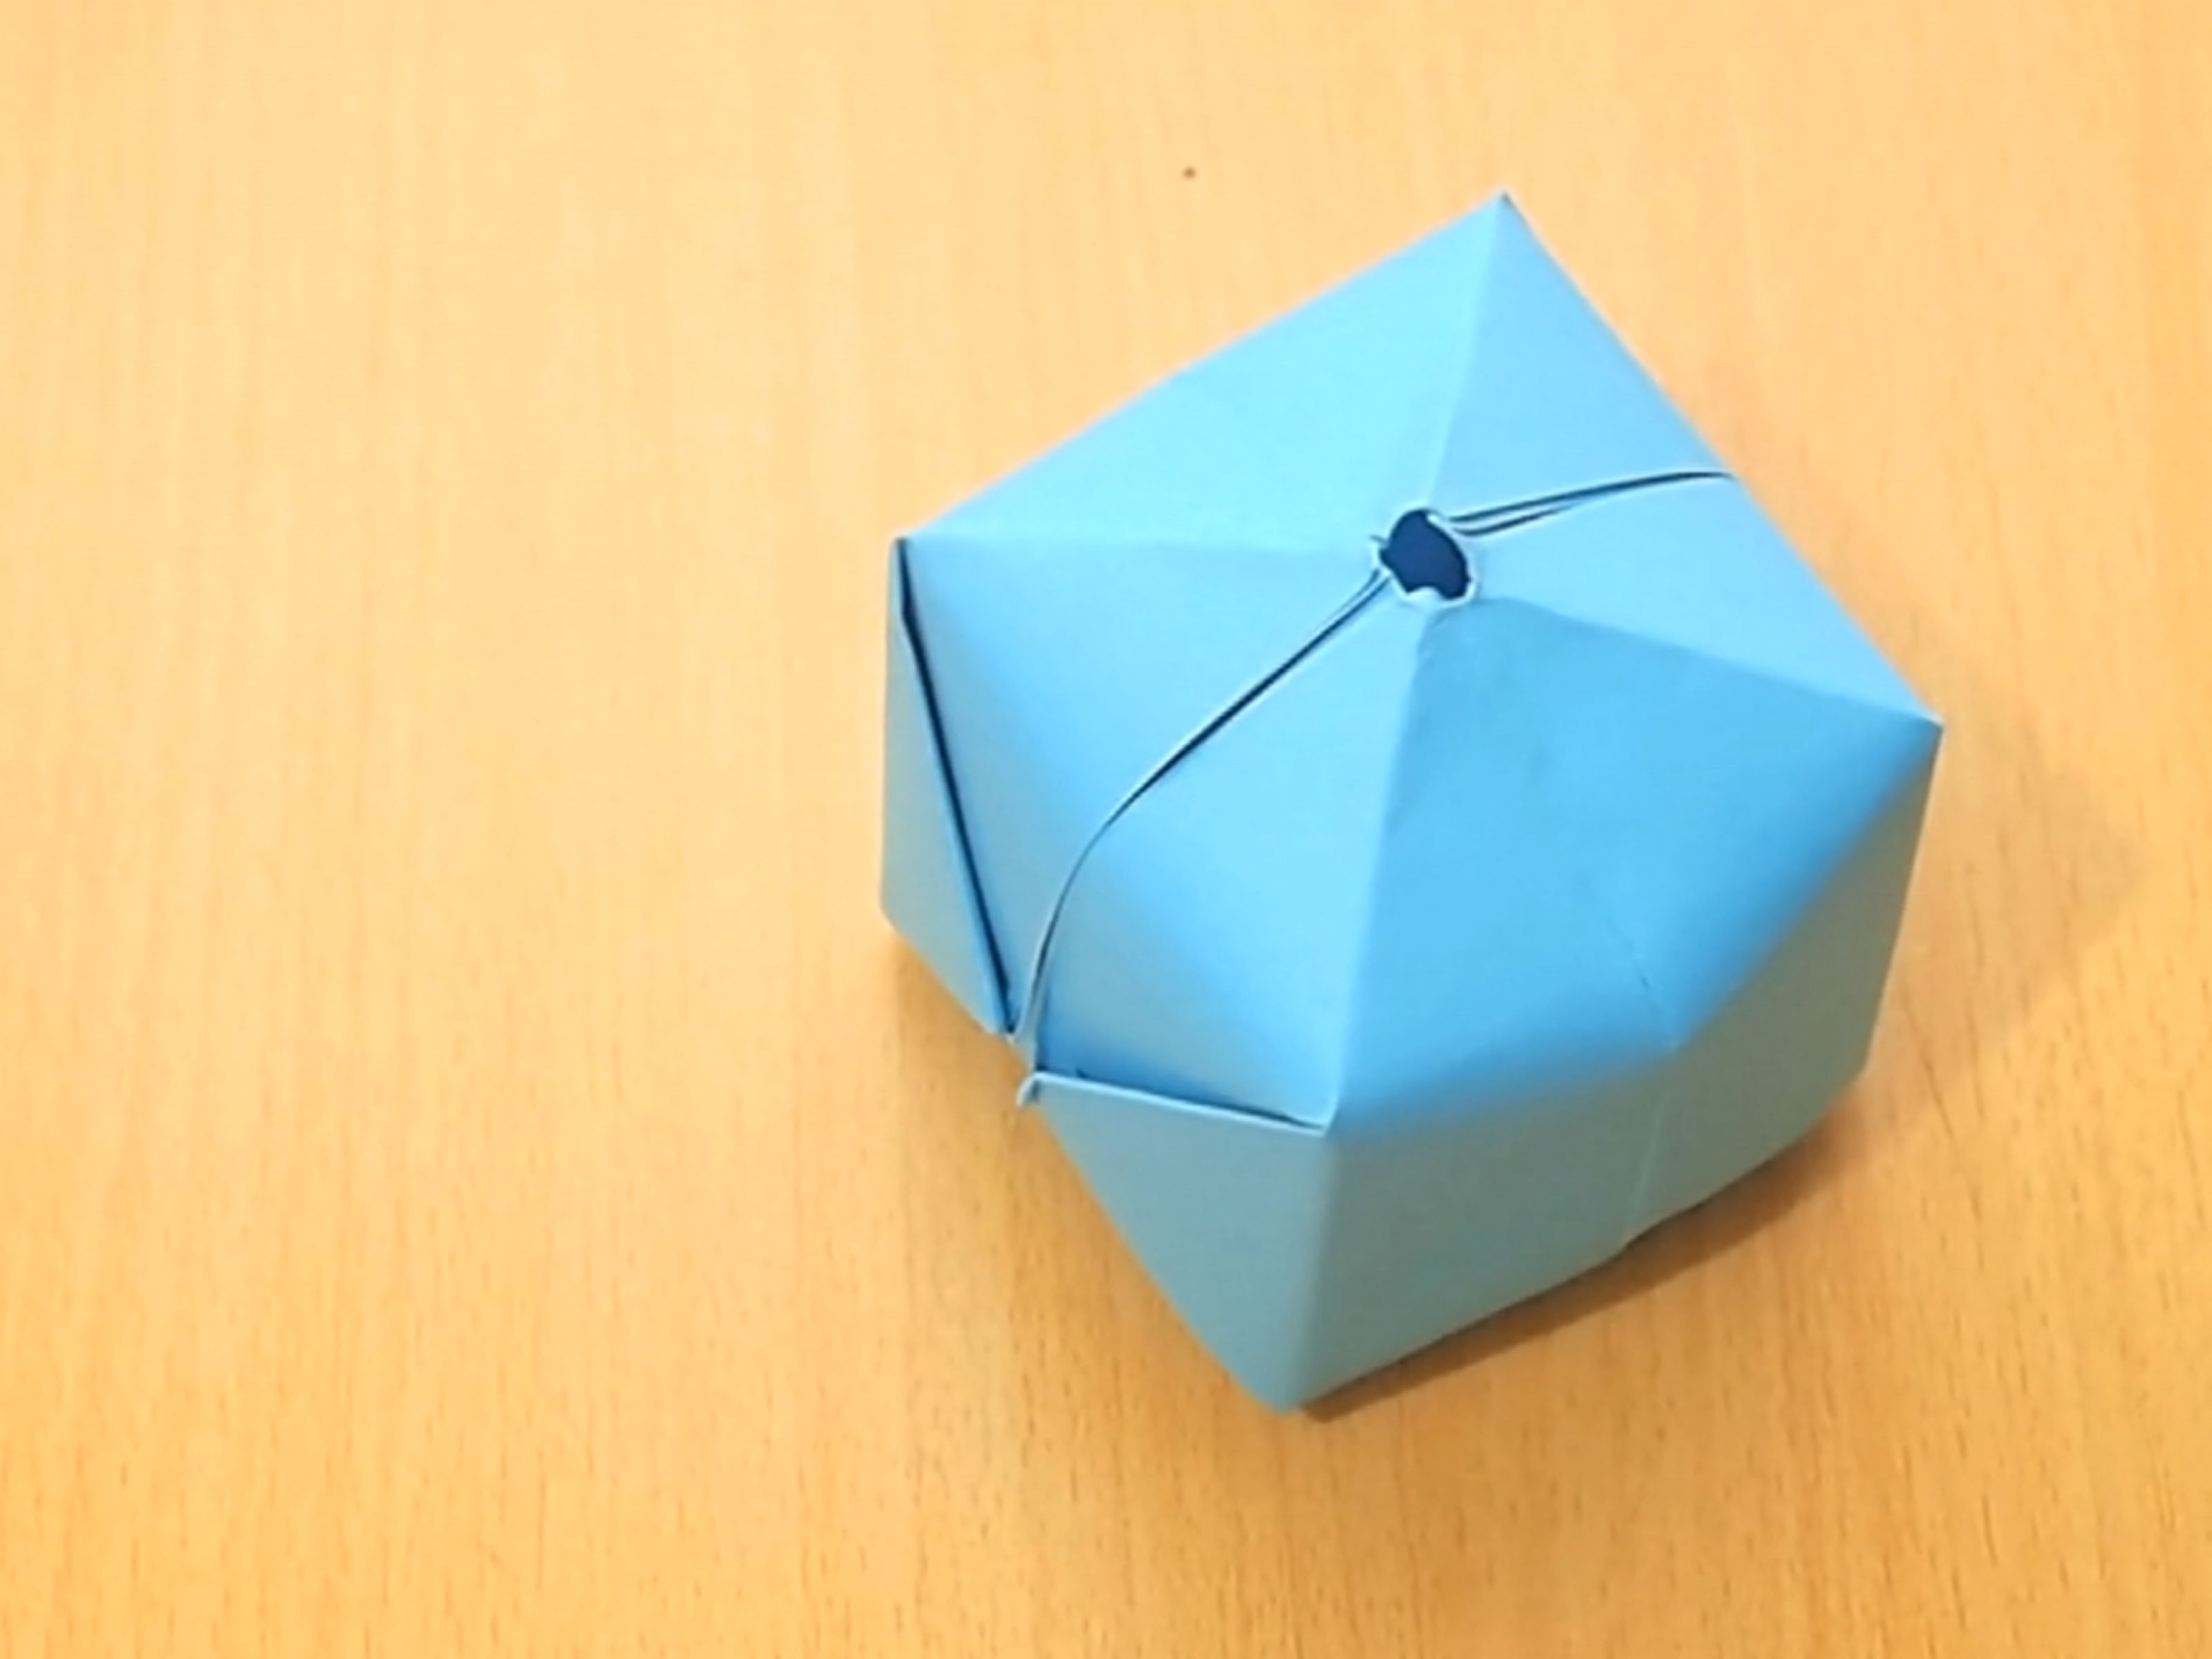 Origami Ball Instructions How To Make An Origami Balloon 8 Steps With Pictures Wikihow